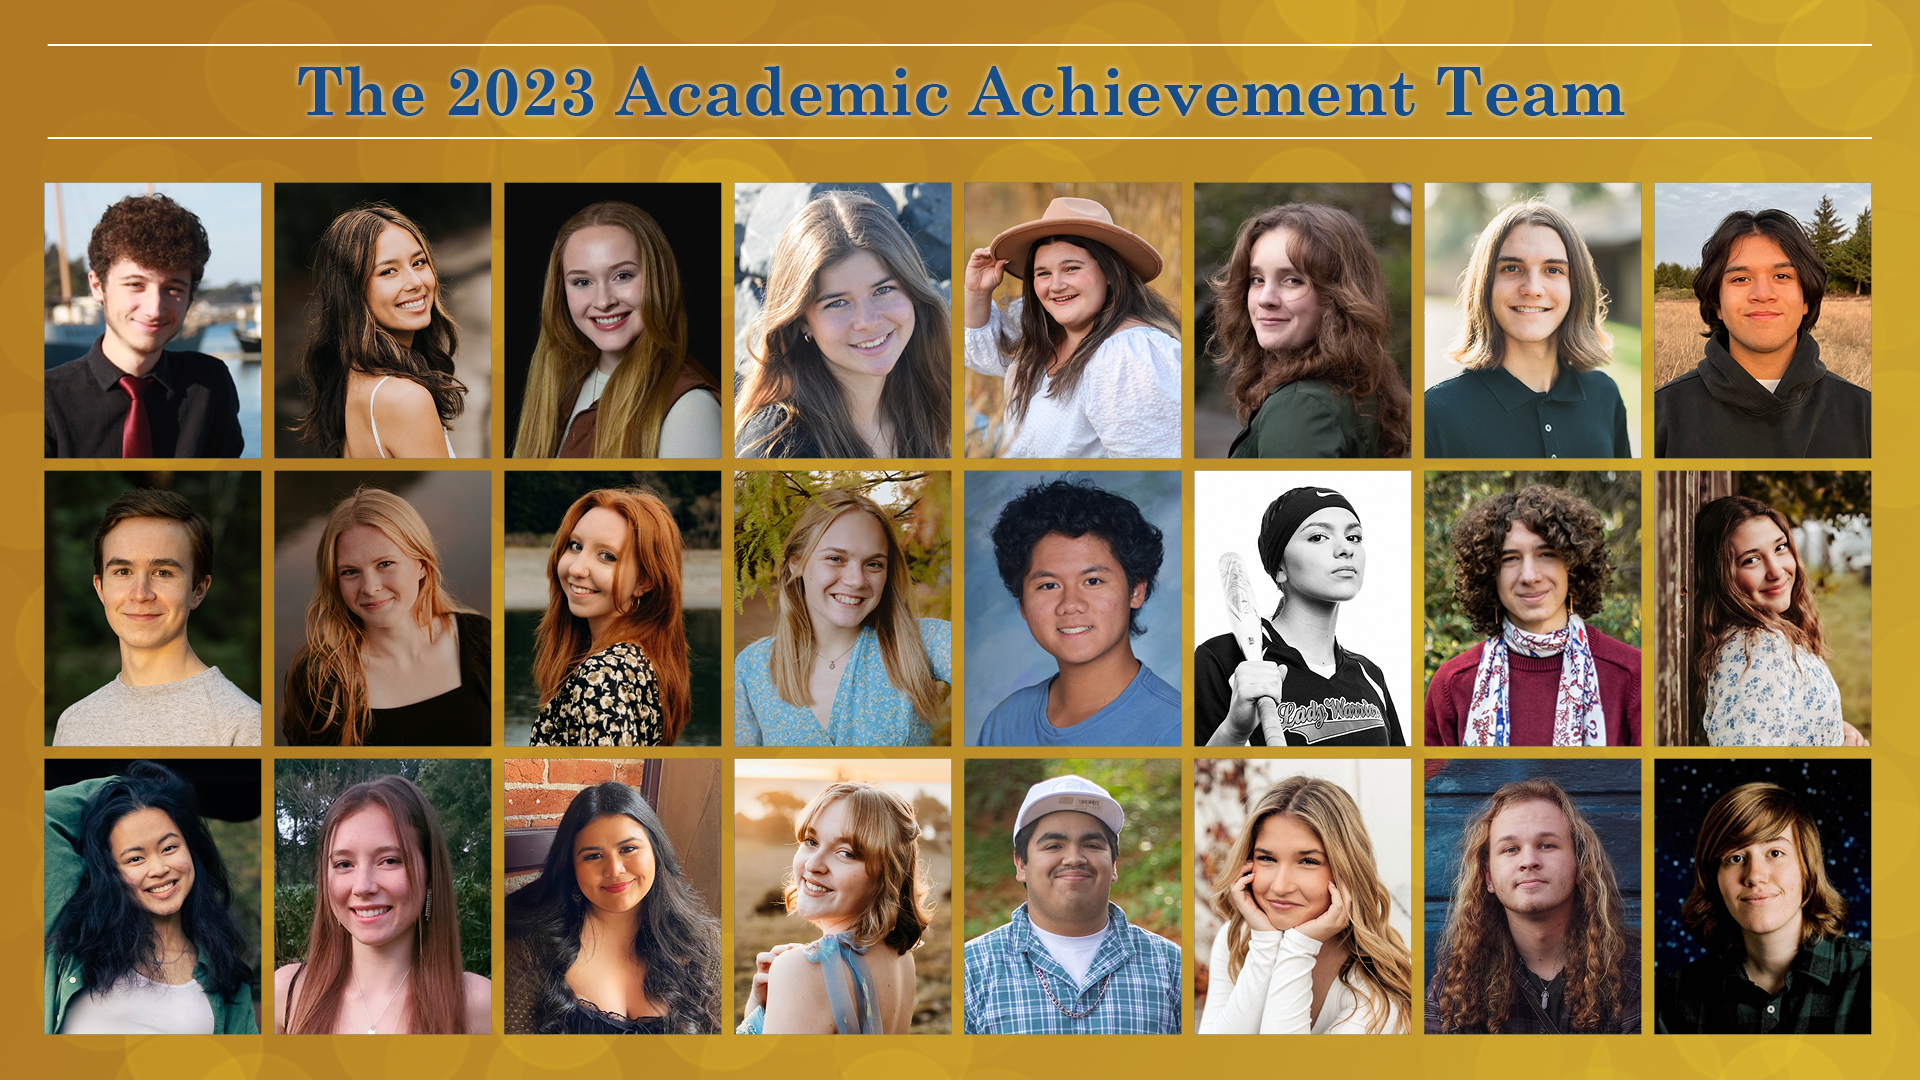 Collage of the 2023 Academic Achievement Team